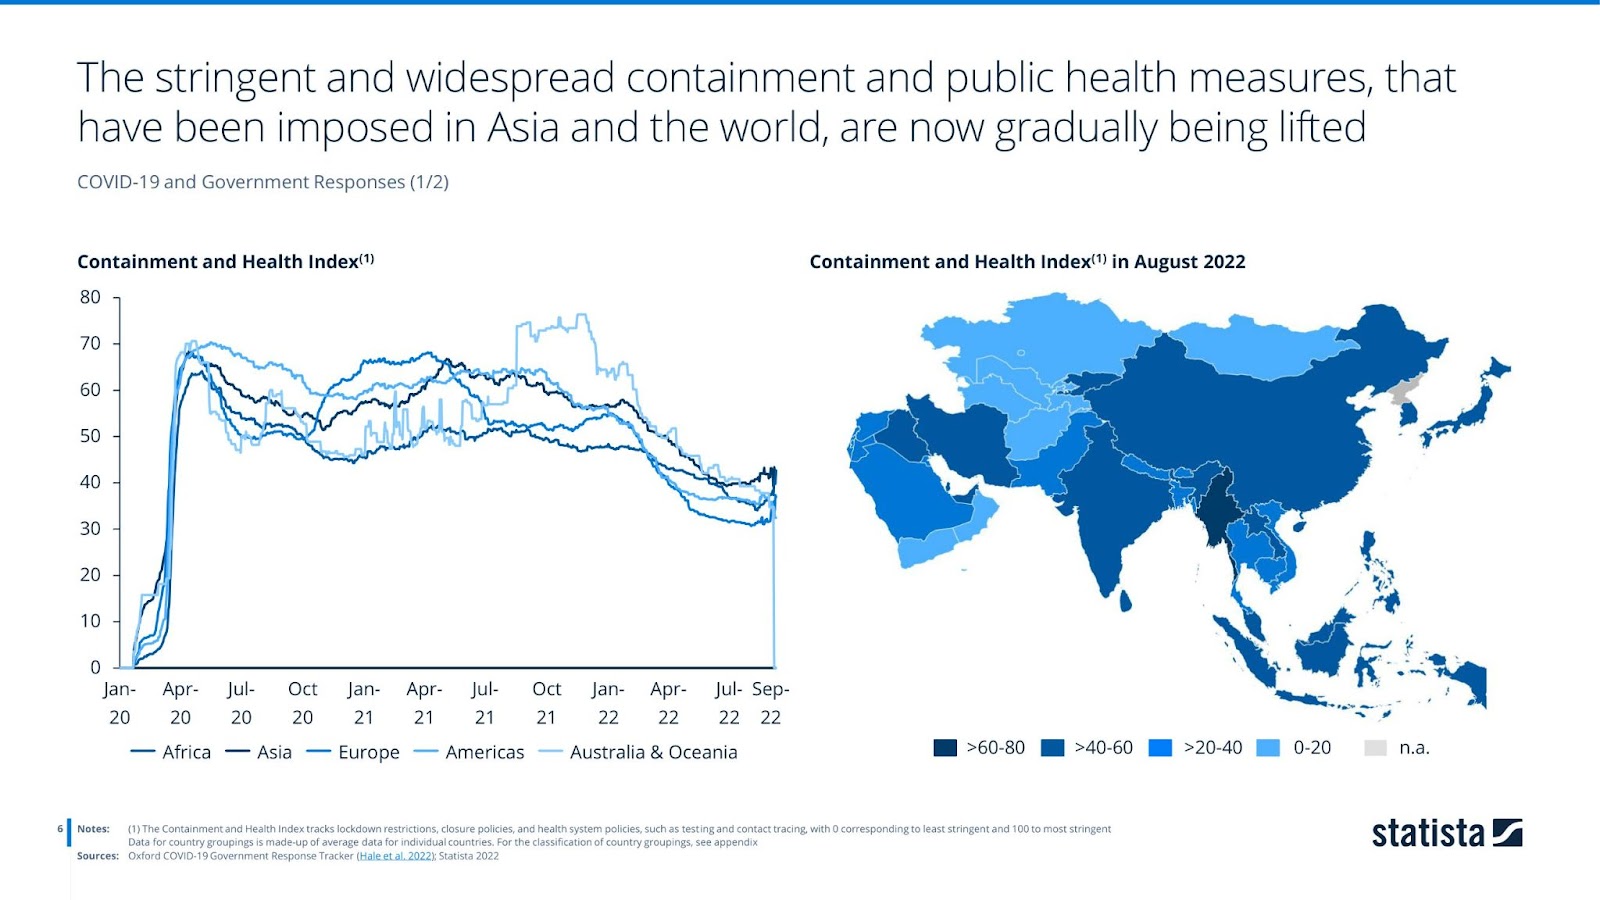 Containment and health index